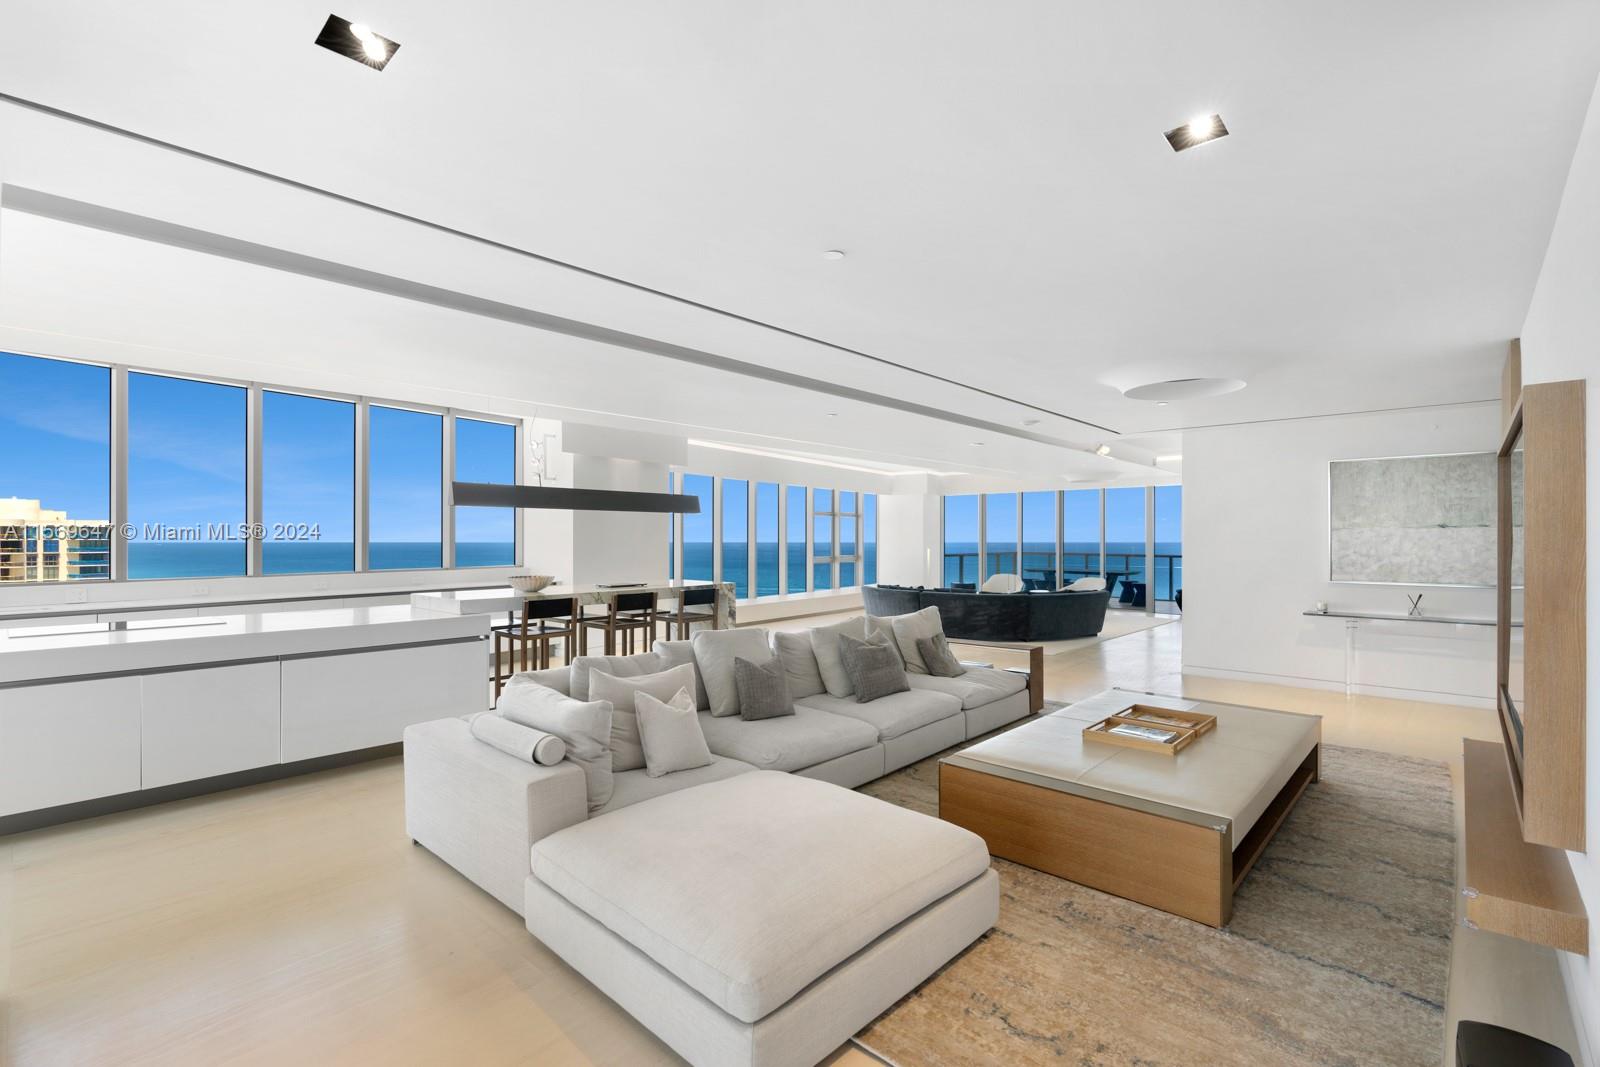 Unique opportunity to own one of the few meticulously renovated corner residences at The St. Regis in Bal Harbour. Private elevator provides direct entry into the unit, which greets you with an expansive living space filled with natural light from your floor-to-ceiling windows that frame the panoramic ocean views. The kitchen has been reconfigured to maximize the East, North, and West exposures, with top-of-the-line finishes such as Calacatta marble. Enjoy the ocean breeze with three balconies spanning 1,132 SF with ample room for lounging and entertaining. Residents of St. Regis enjoy on-site restaurants, Remède Spa with steam and sauna facilities, cold and hot plunges, 2 ocean-view pools, beach cabanas, a 24-hour concierge, and a fitness center.